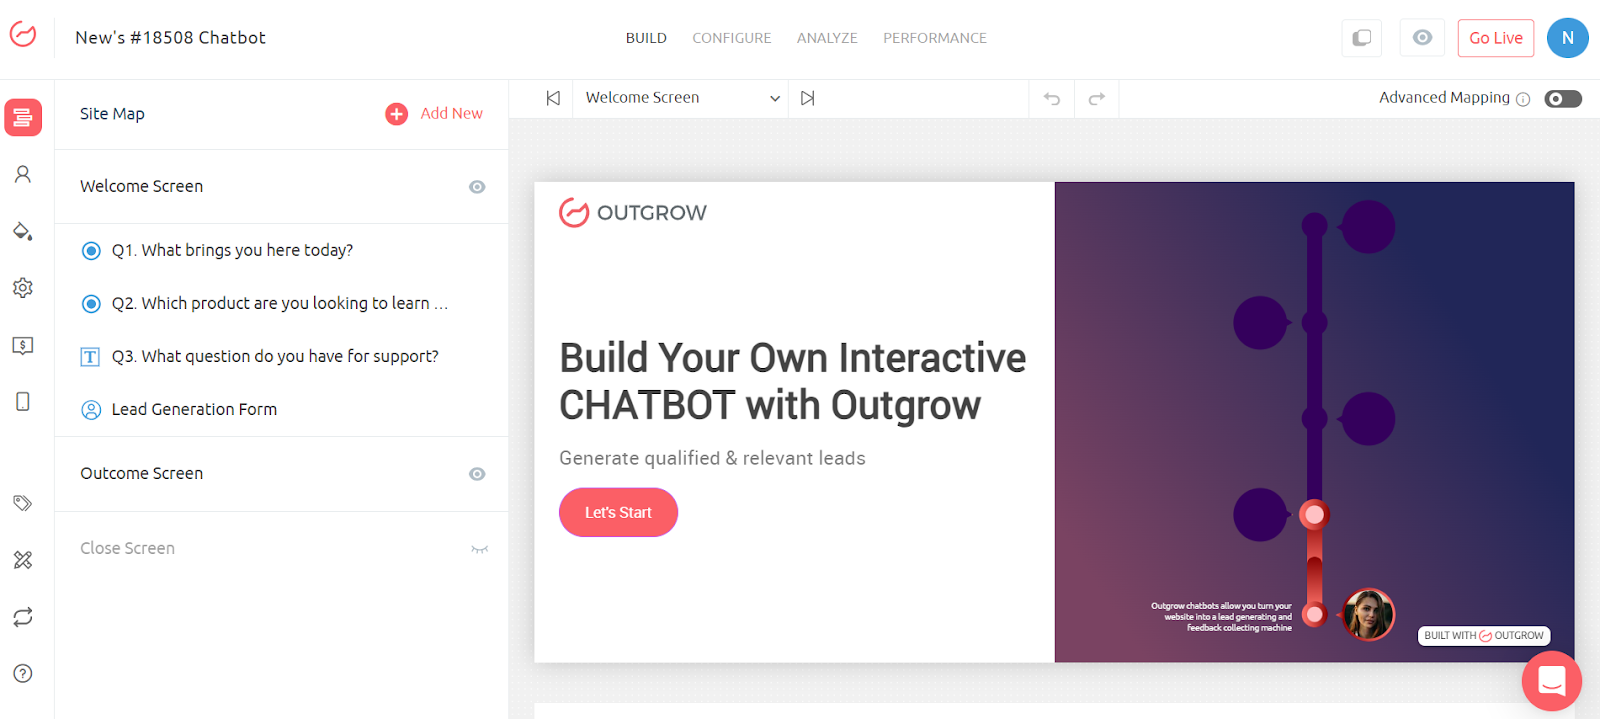 Build screen of Outgrow's chatbot